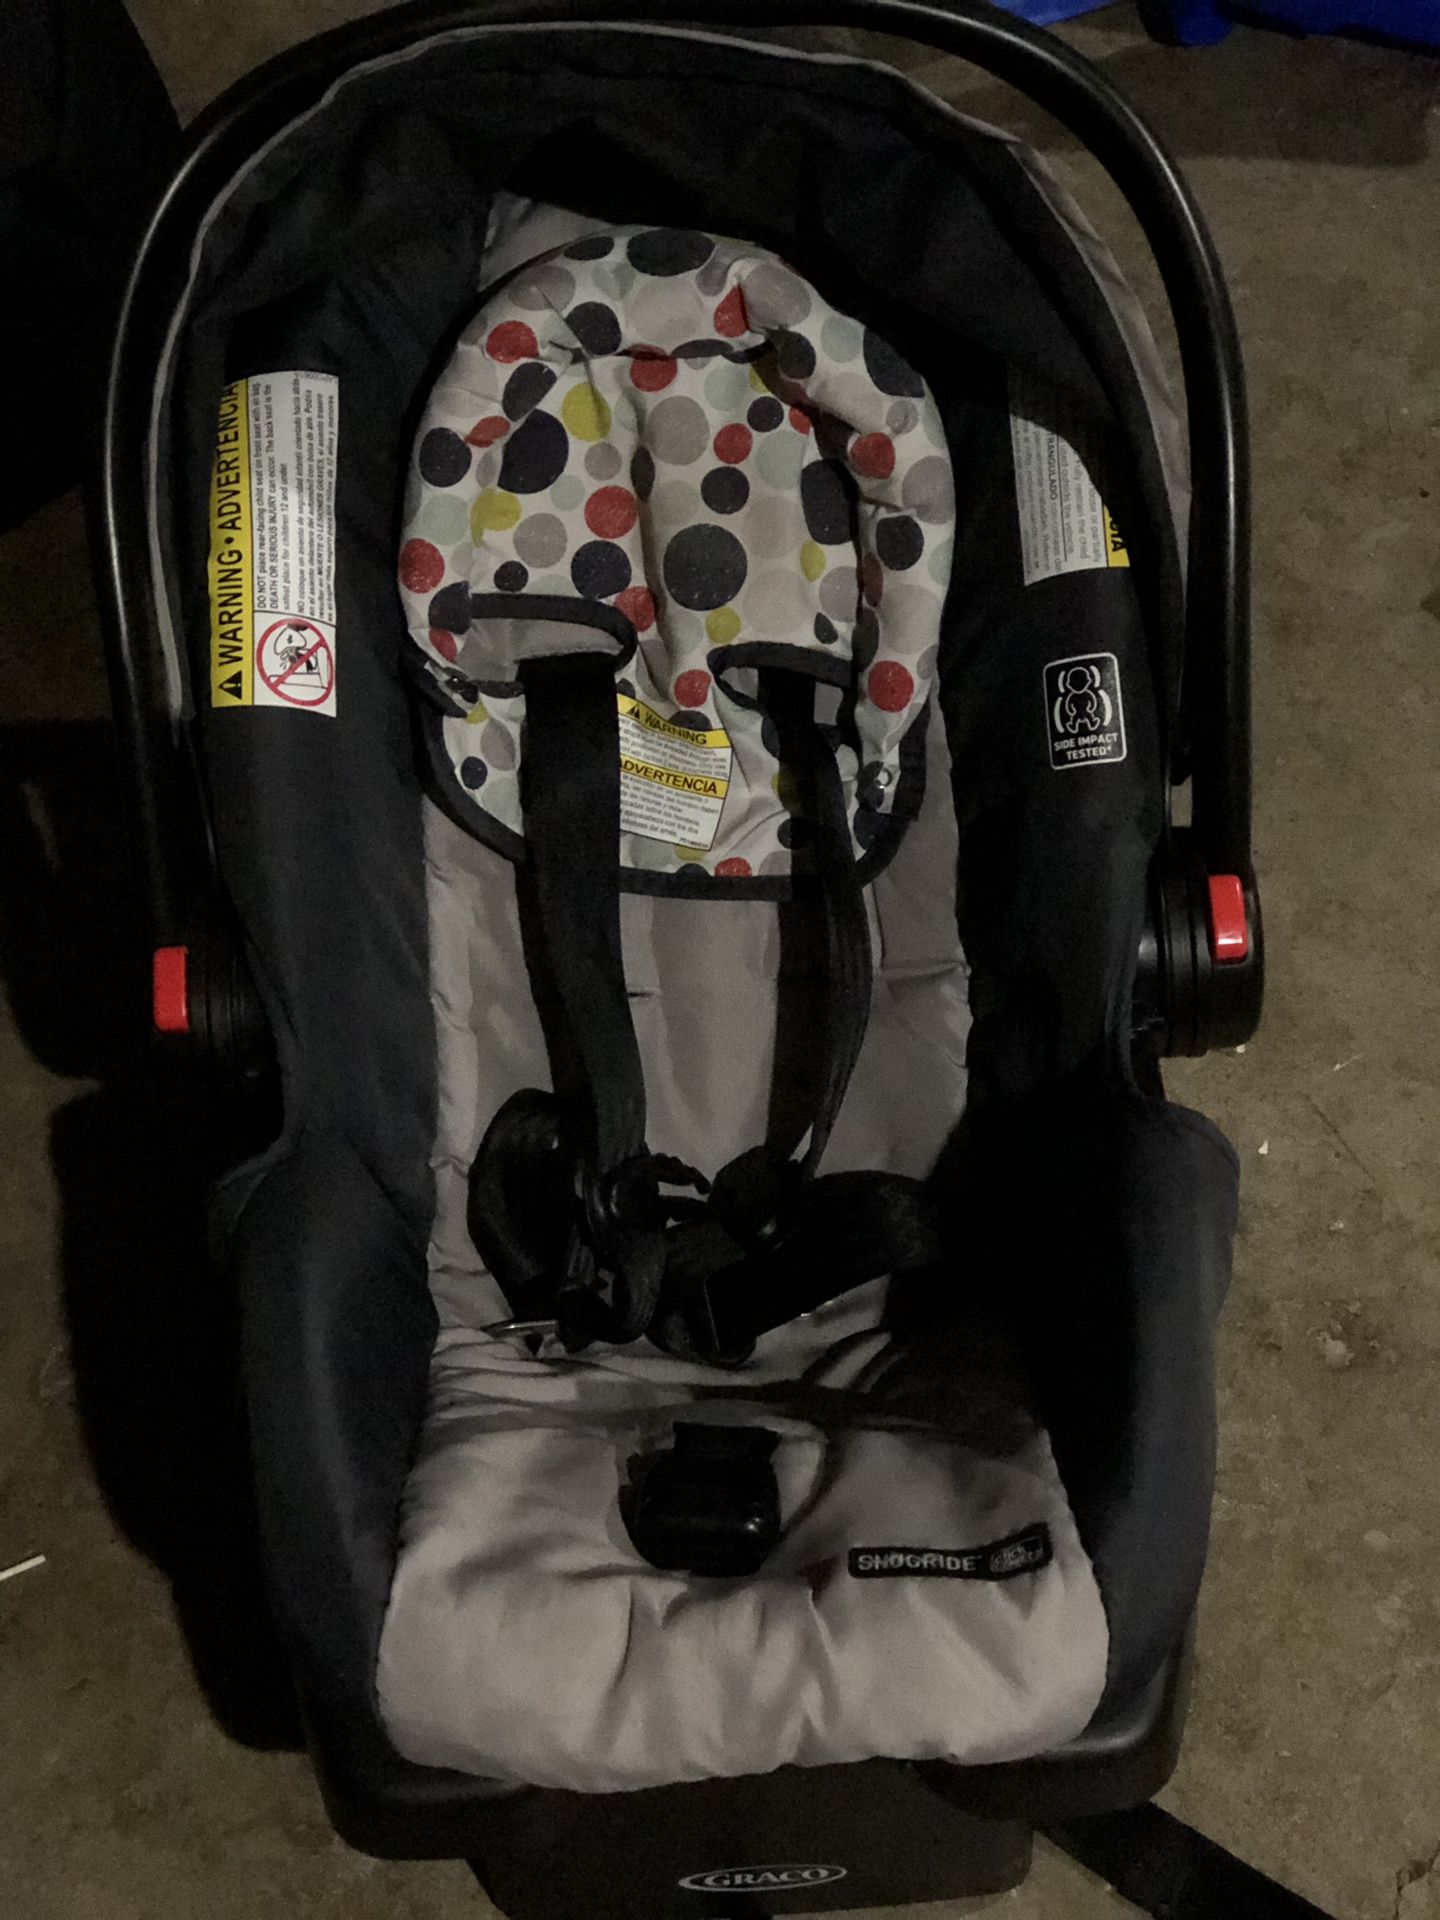 Graco Car Seat with base